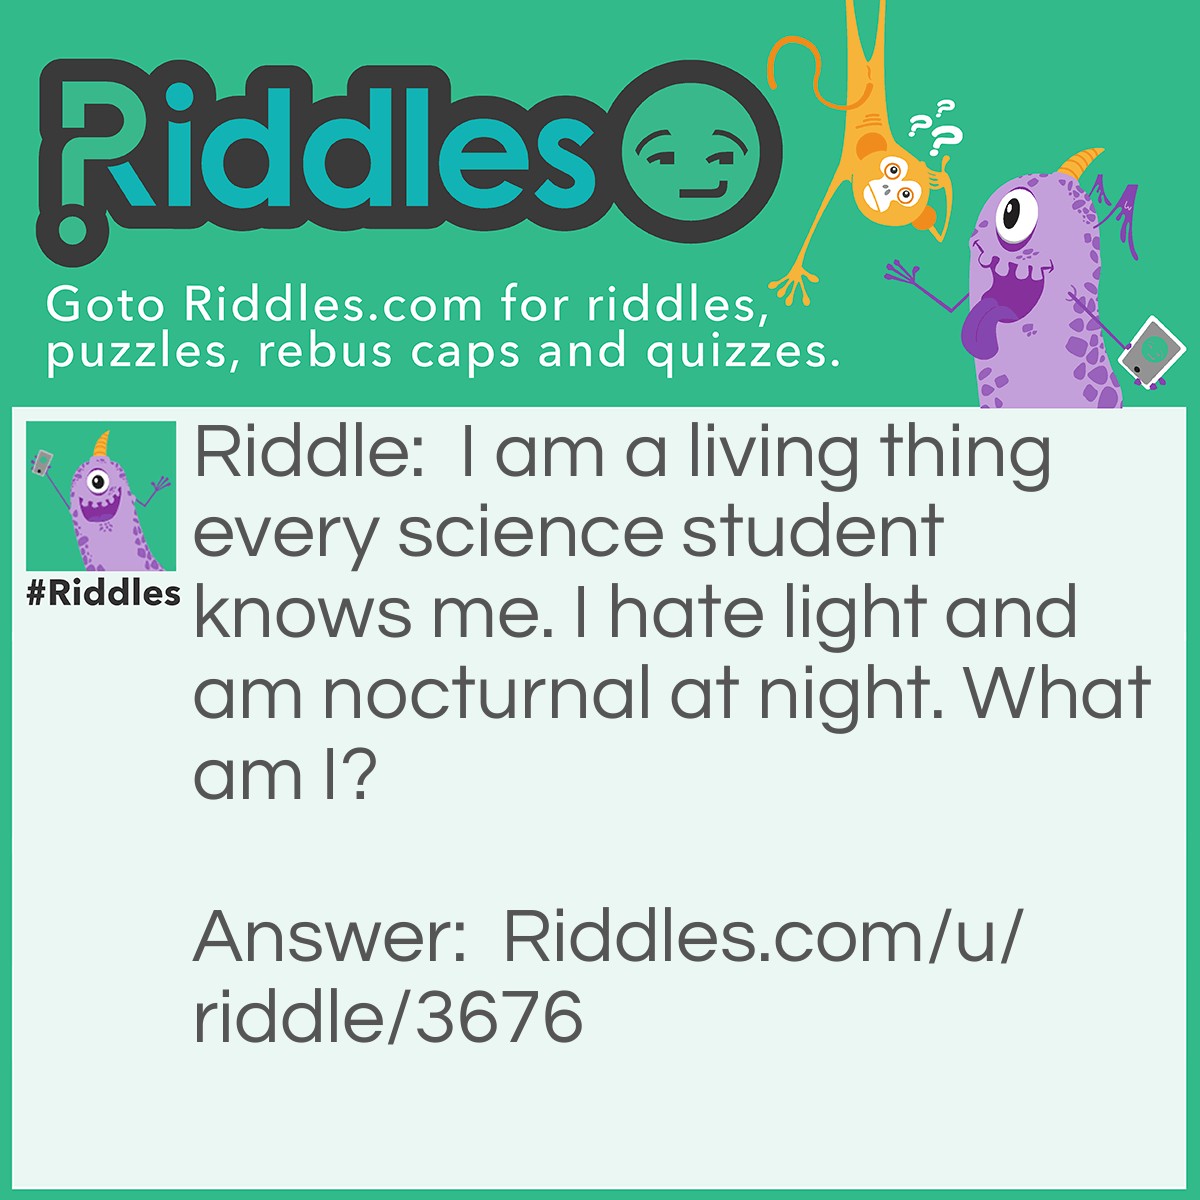 Riddle: I am a living thing every science student knows me. I hate light and am nocturnal at night. What am I? Answer: A cockroach.